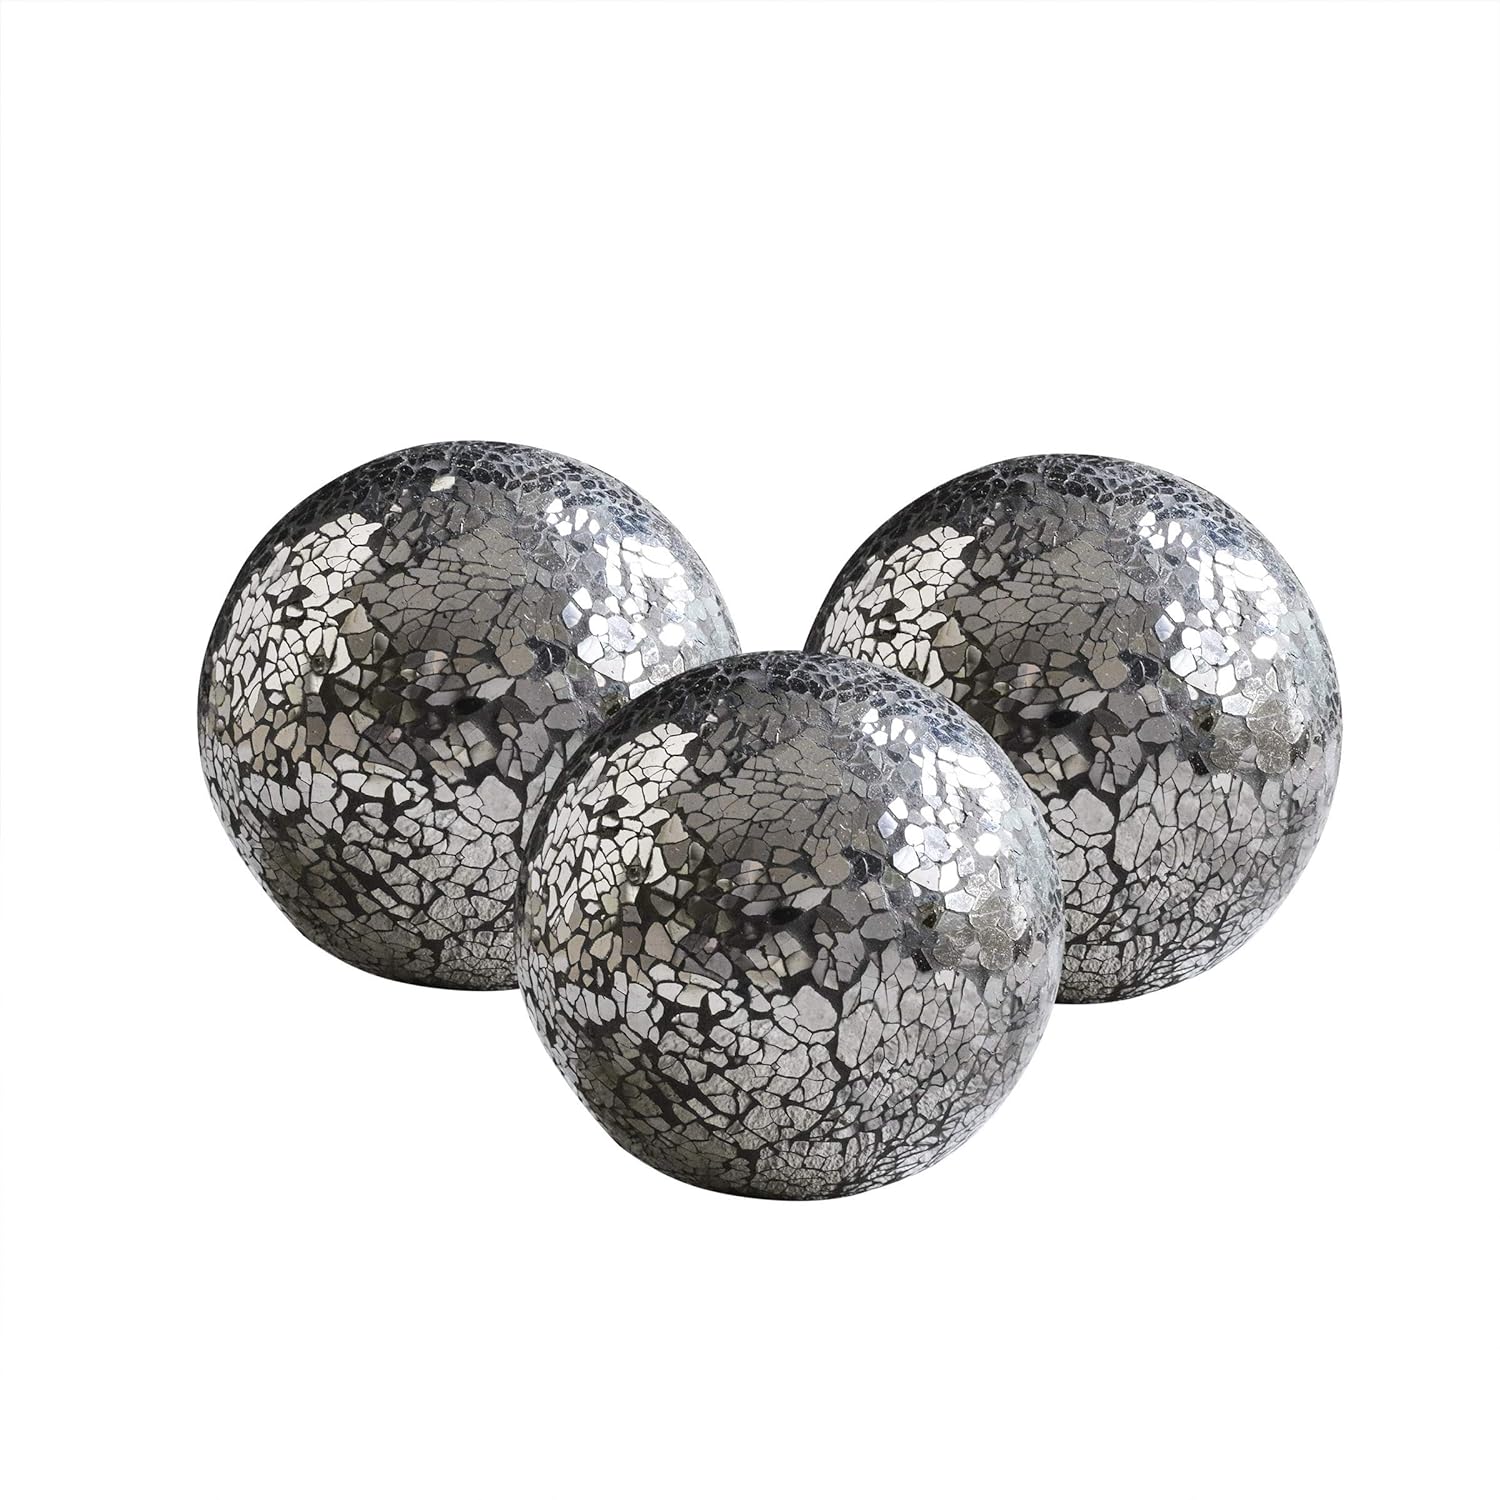 WHOLE HOUSEWARES | Decorative Balls | Set of 3 Glass Mosaic Orbs for Bowls | 4 Diameter | Table Centerpiece | Coffee Table and House Decor (Mirror-Black)